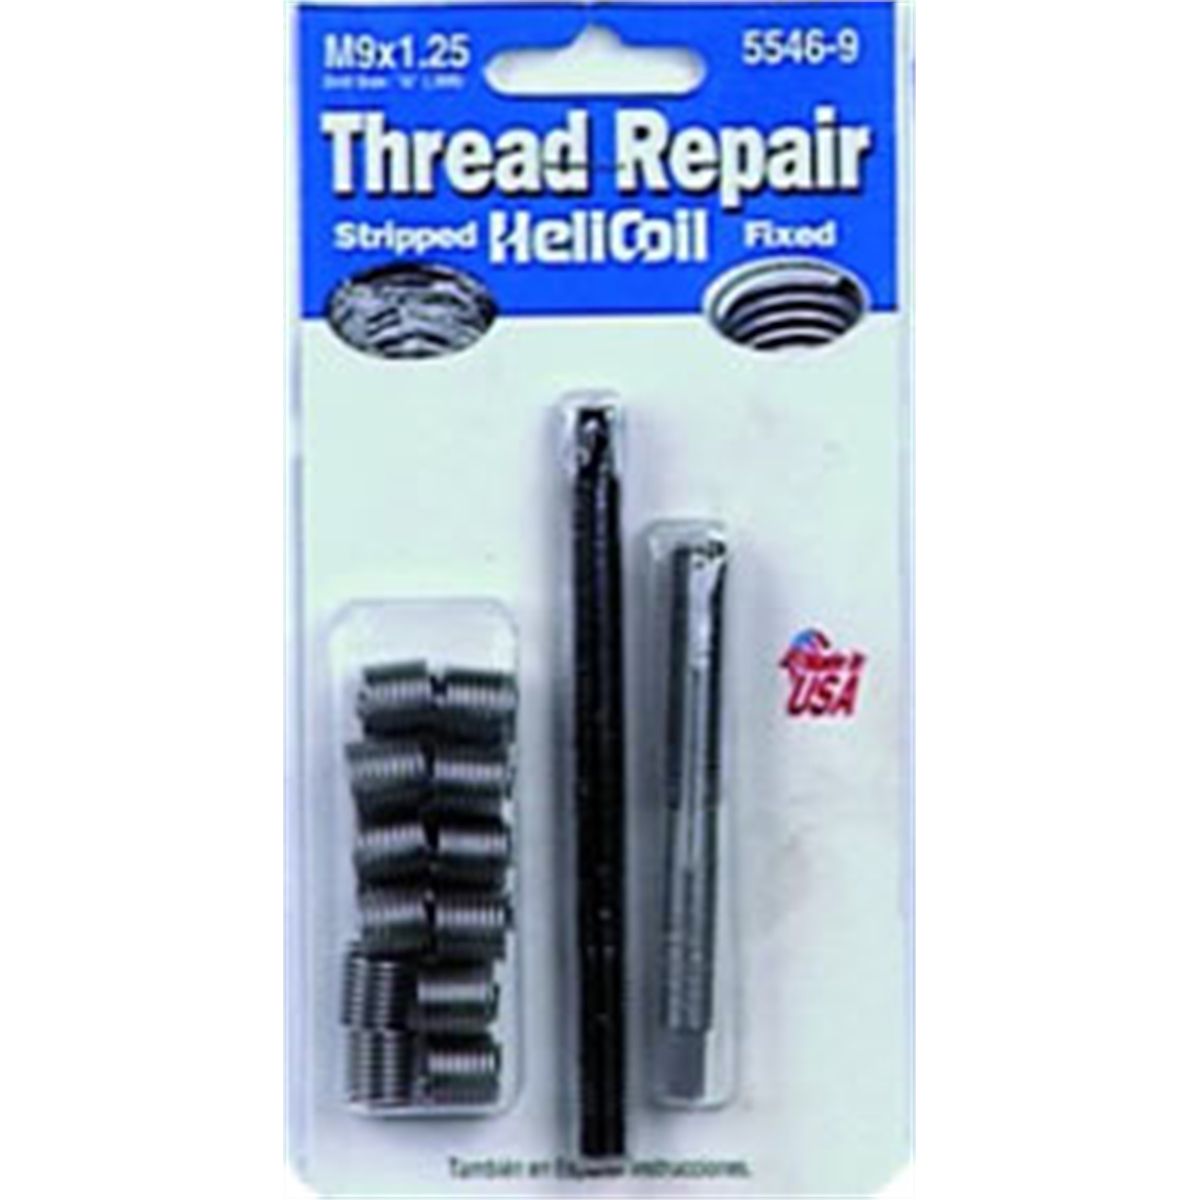 Helicoil 5546-9 M9x1 25 Metric Coarse Thread Repair Kit for sale online 